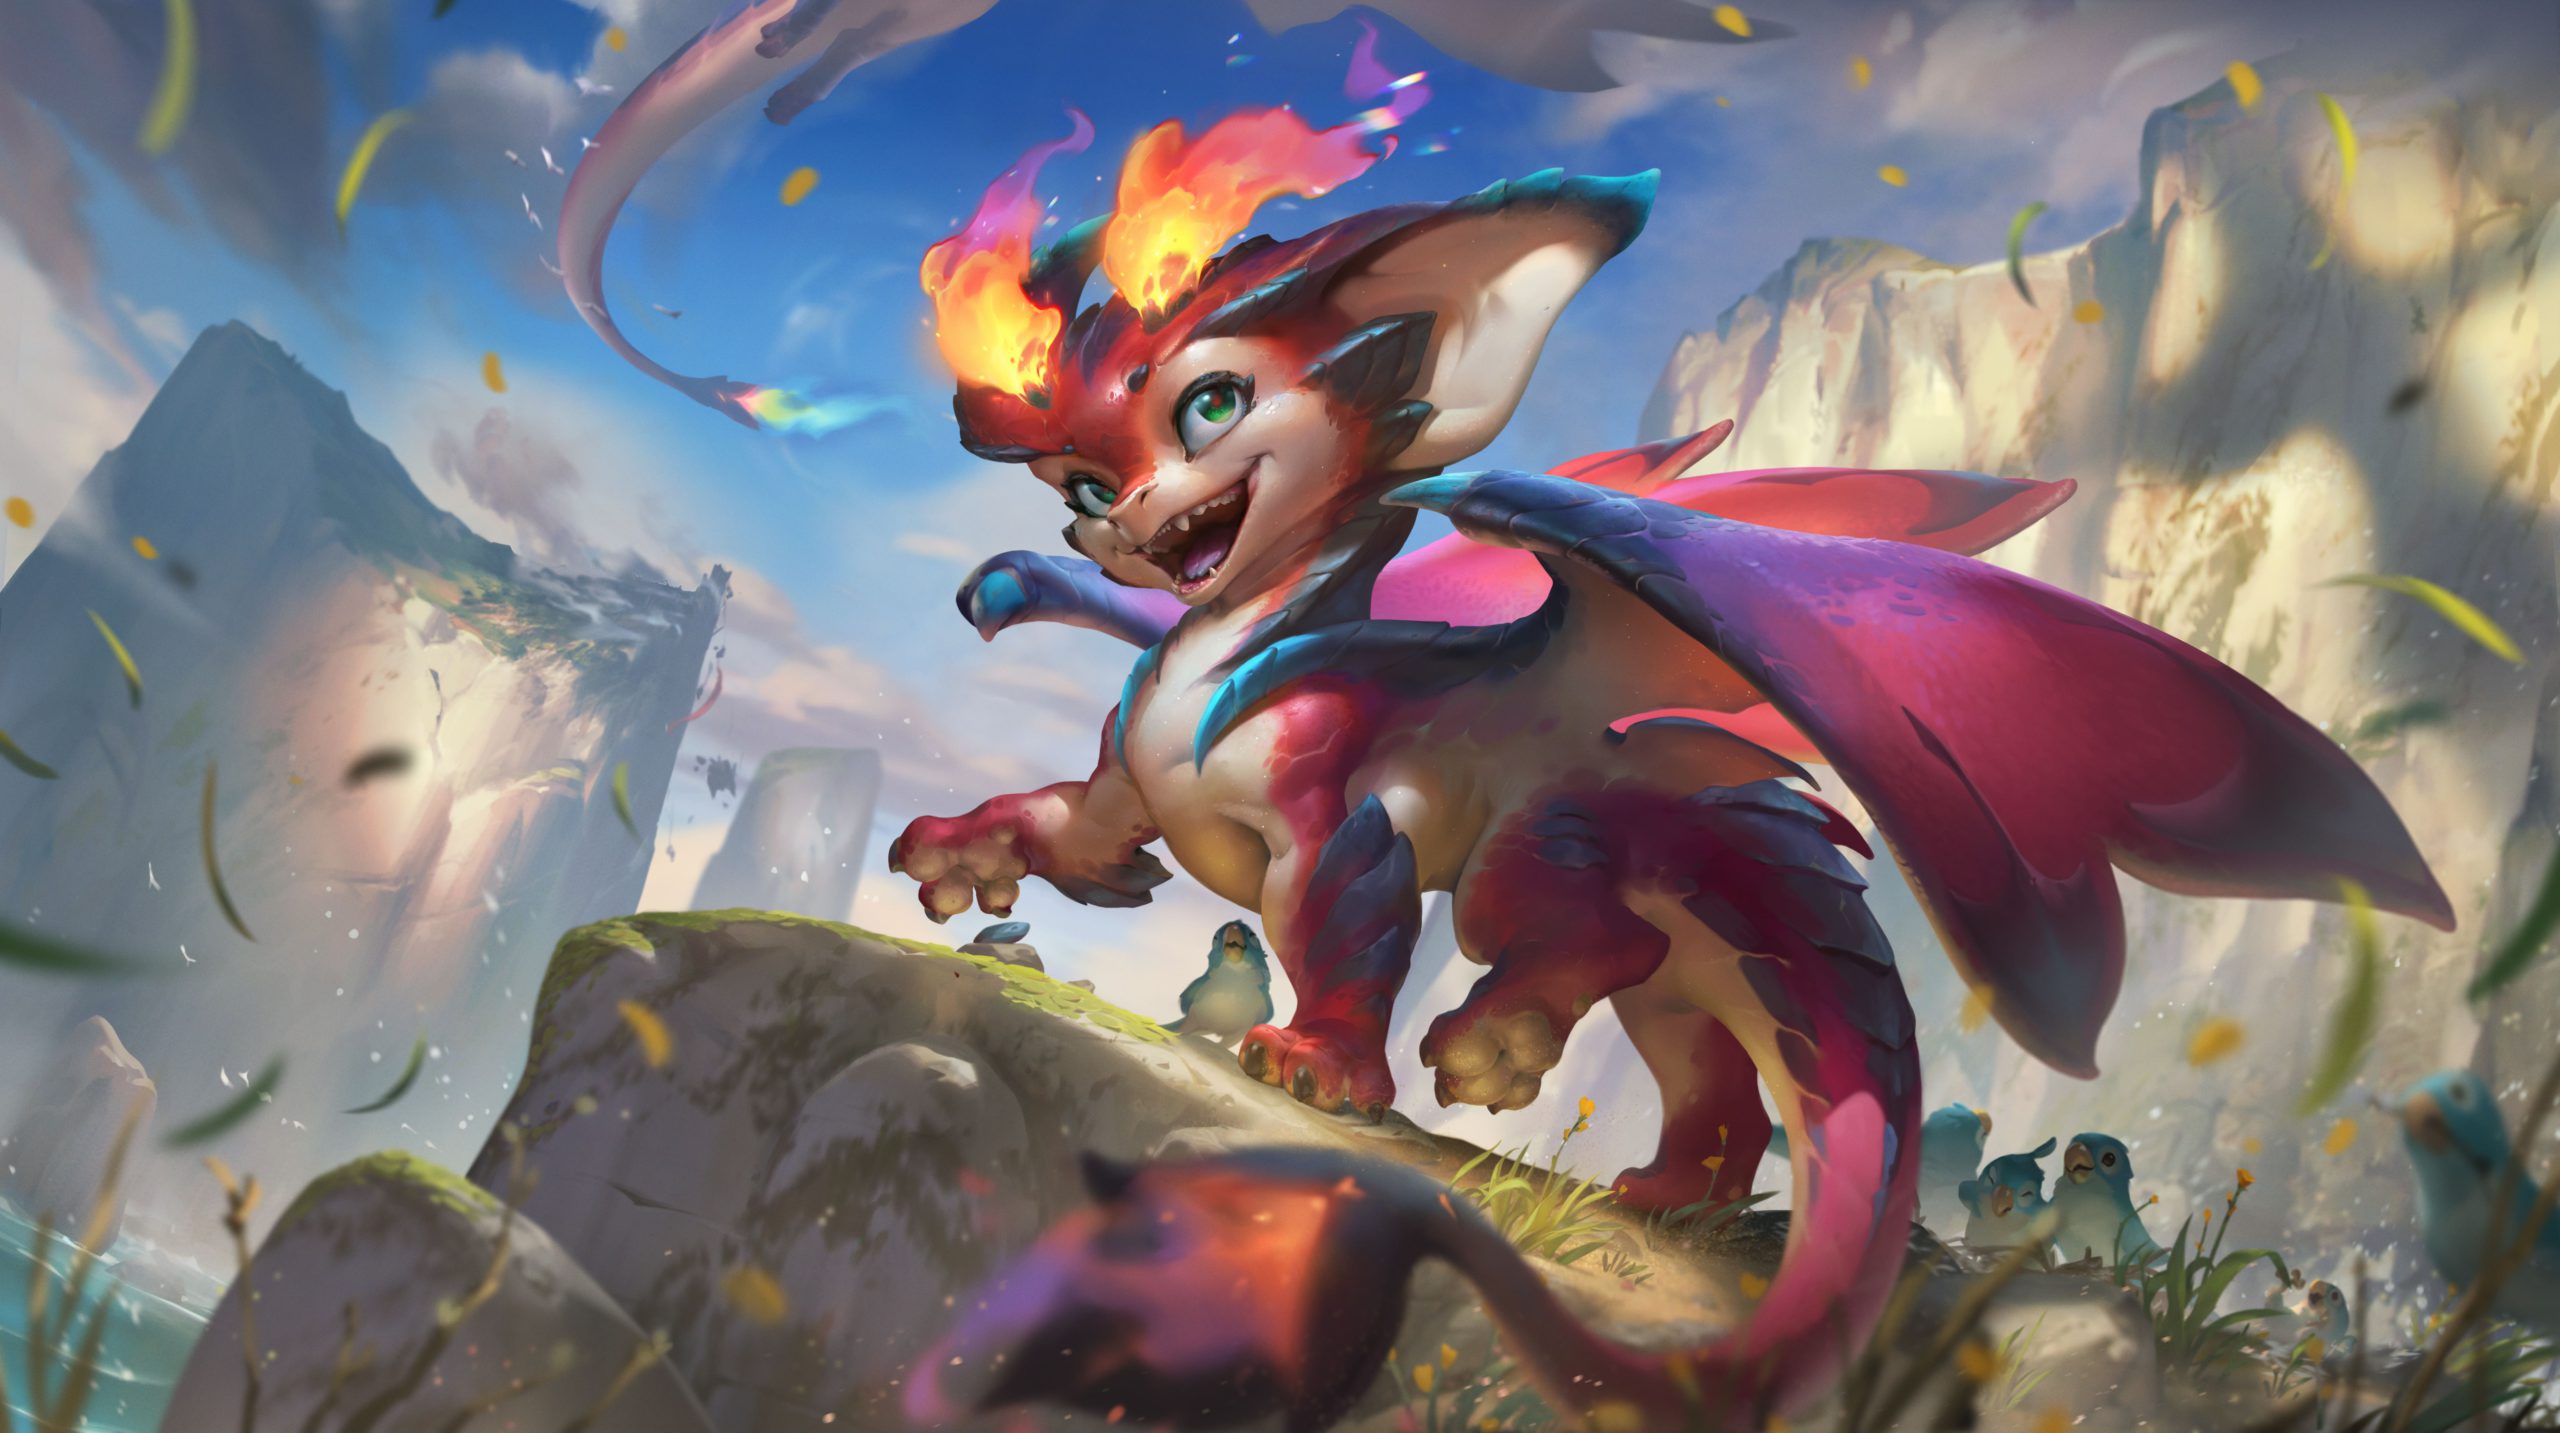 In the photo you can see the splash art of Smolder, the new LoL champion